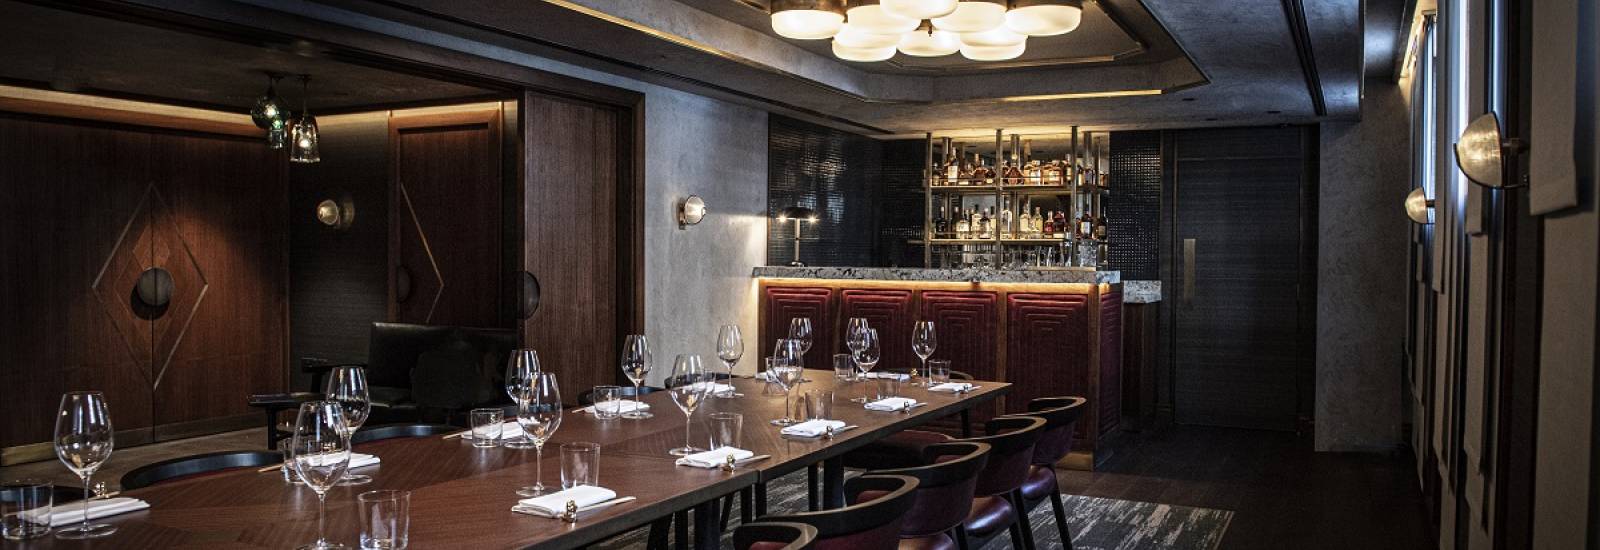 Private Dining Rooms In London Gordon, Private Dining Room